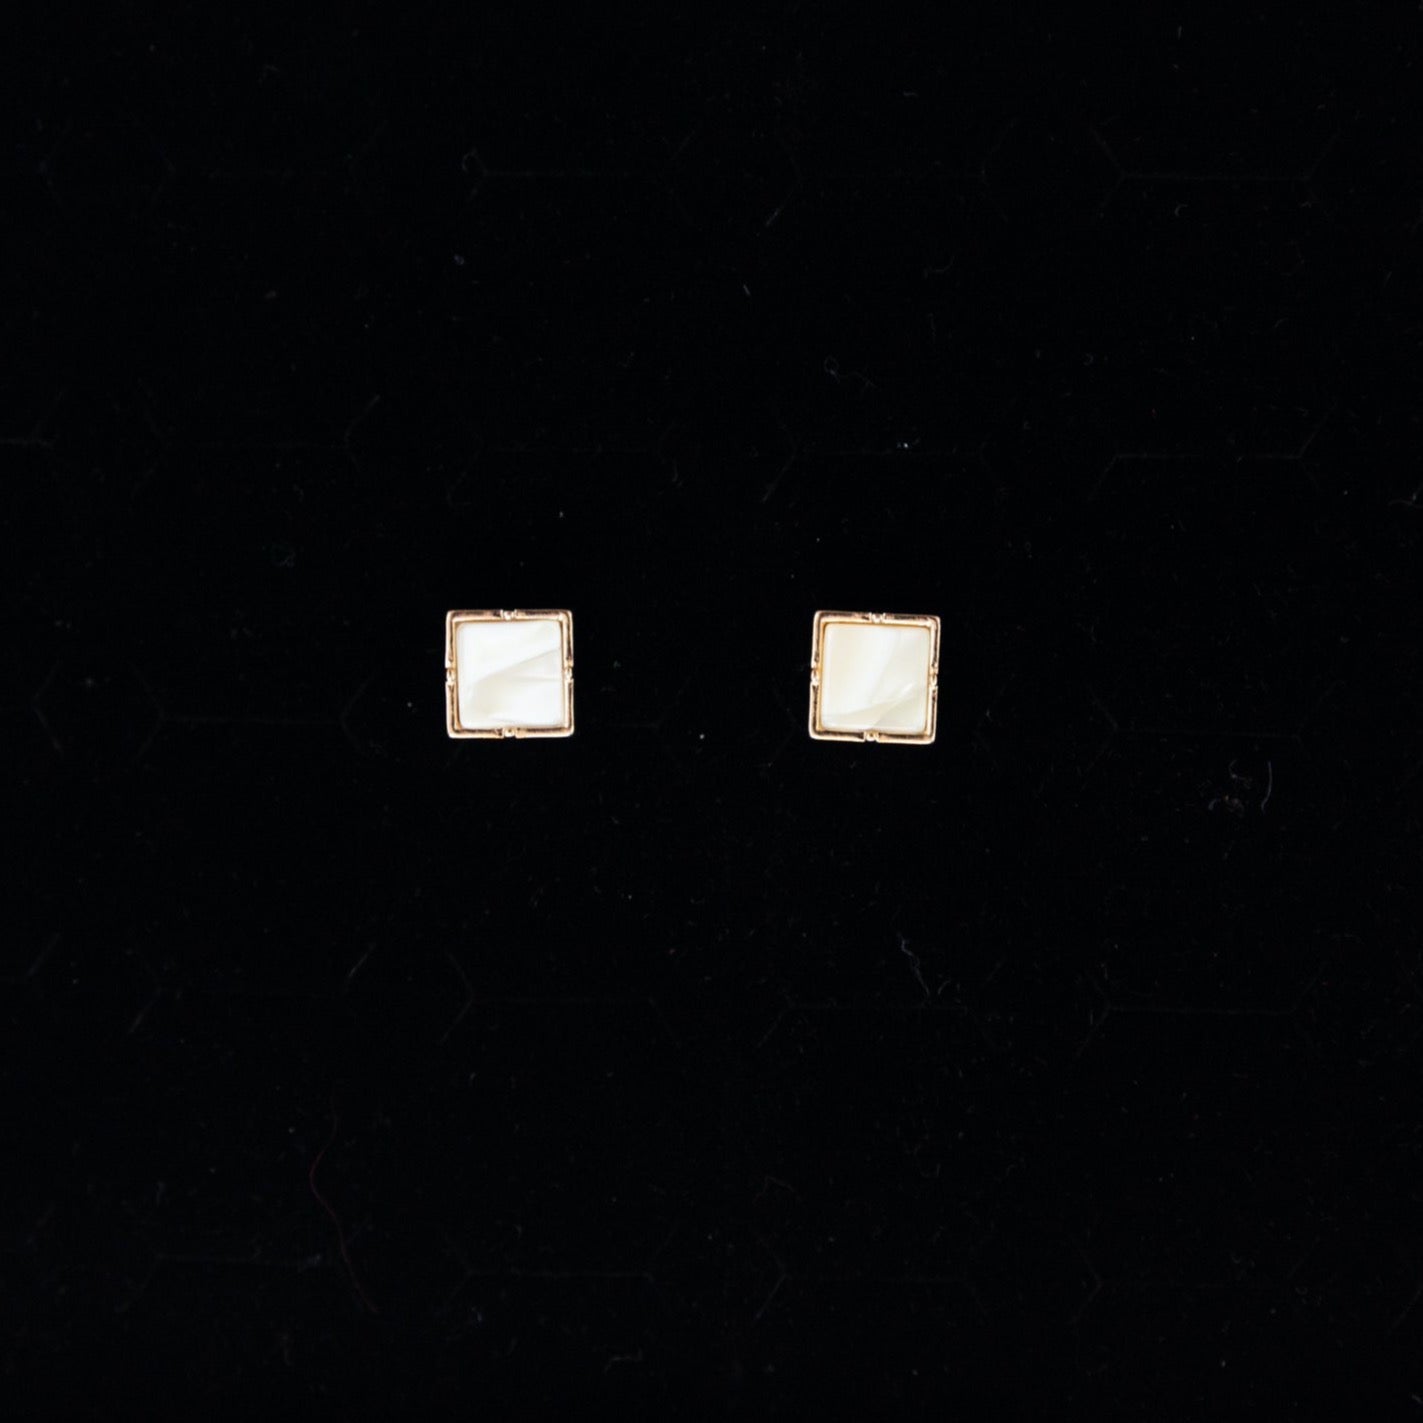 The Square Earrings with White Stone